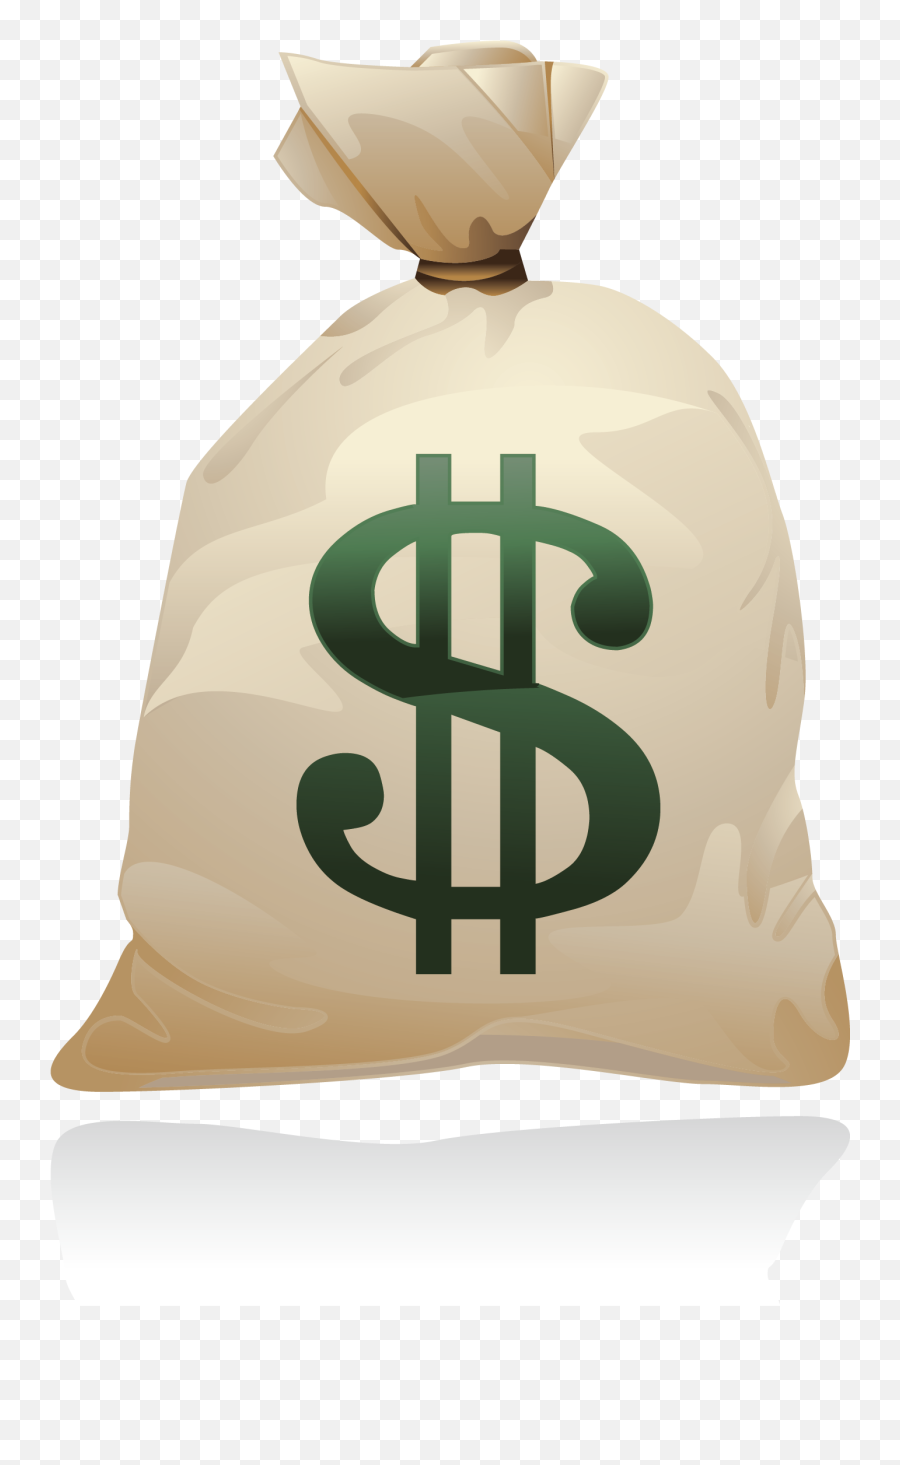 Money Bags - Bag Of Money Transparent PNG Image With Transparent Background